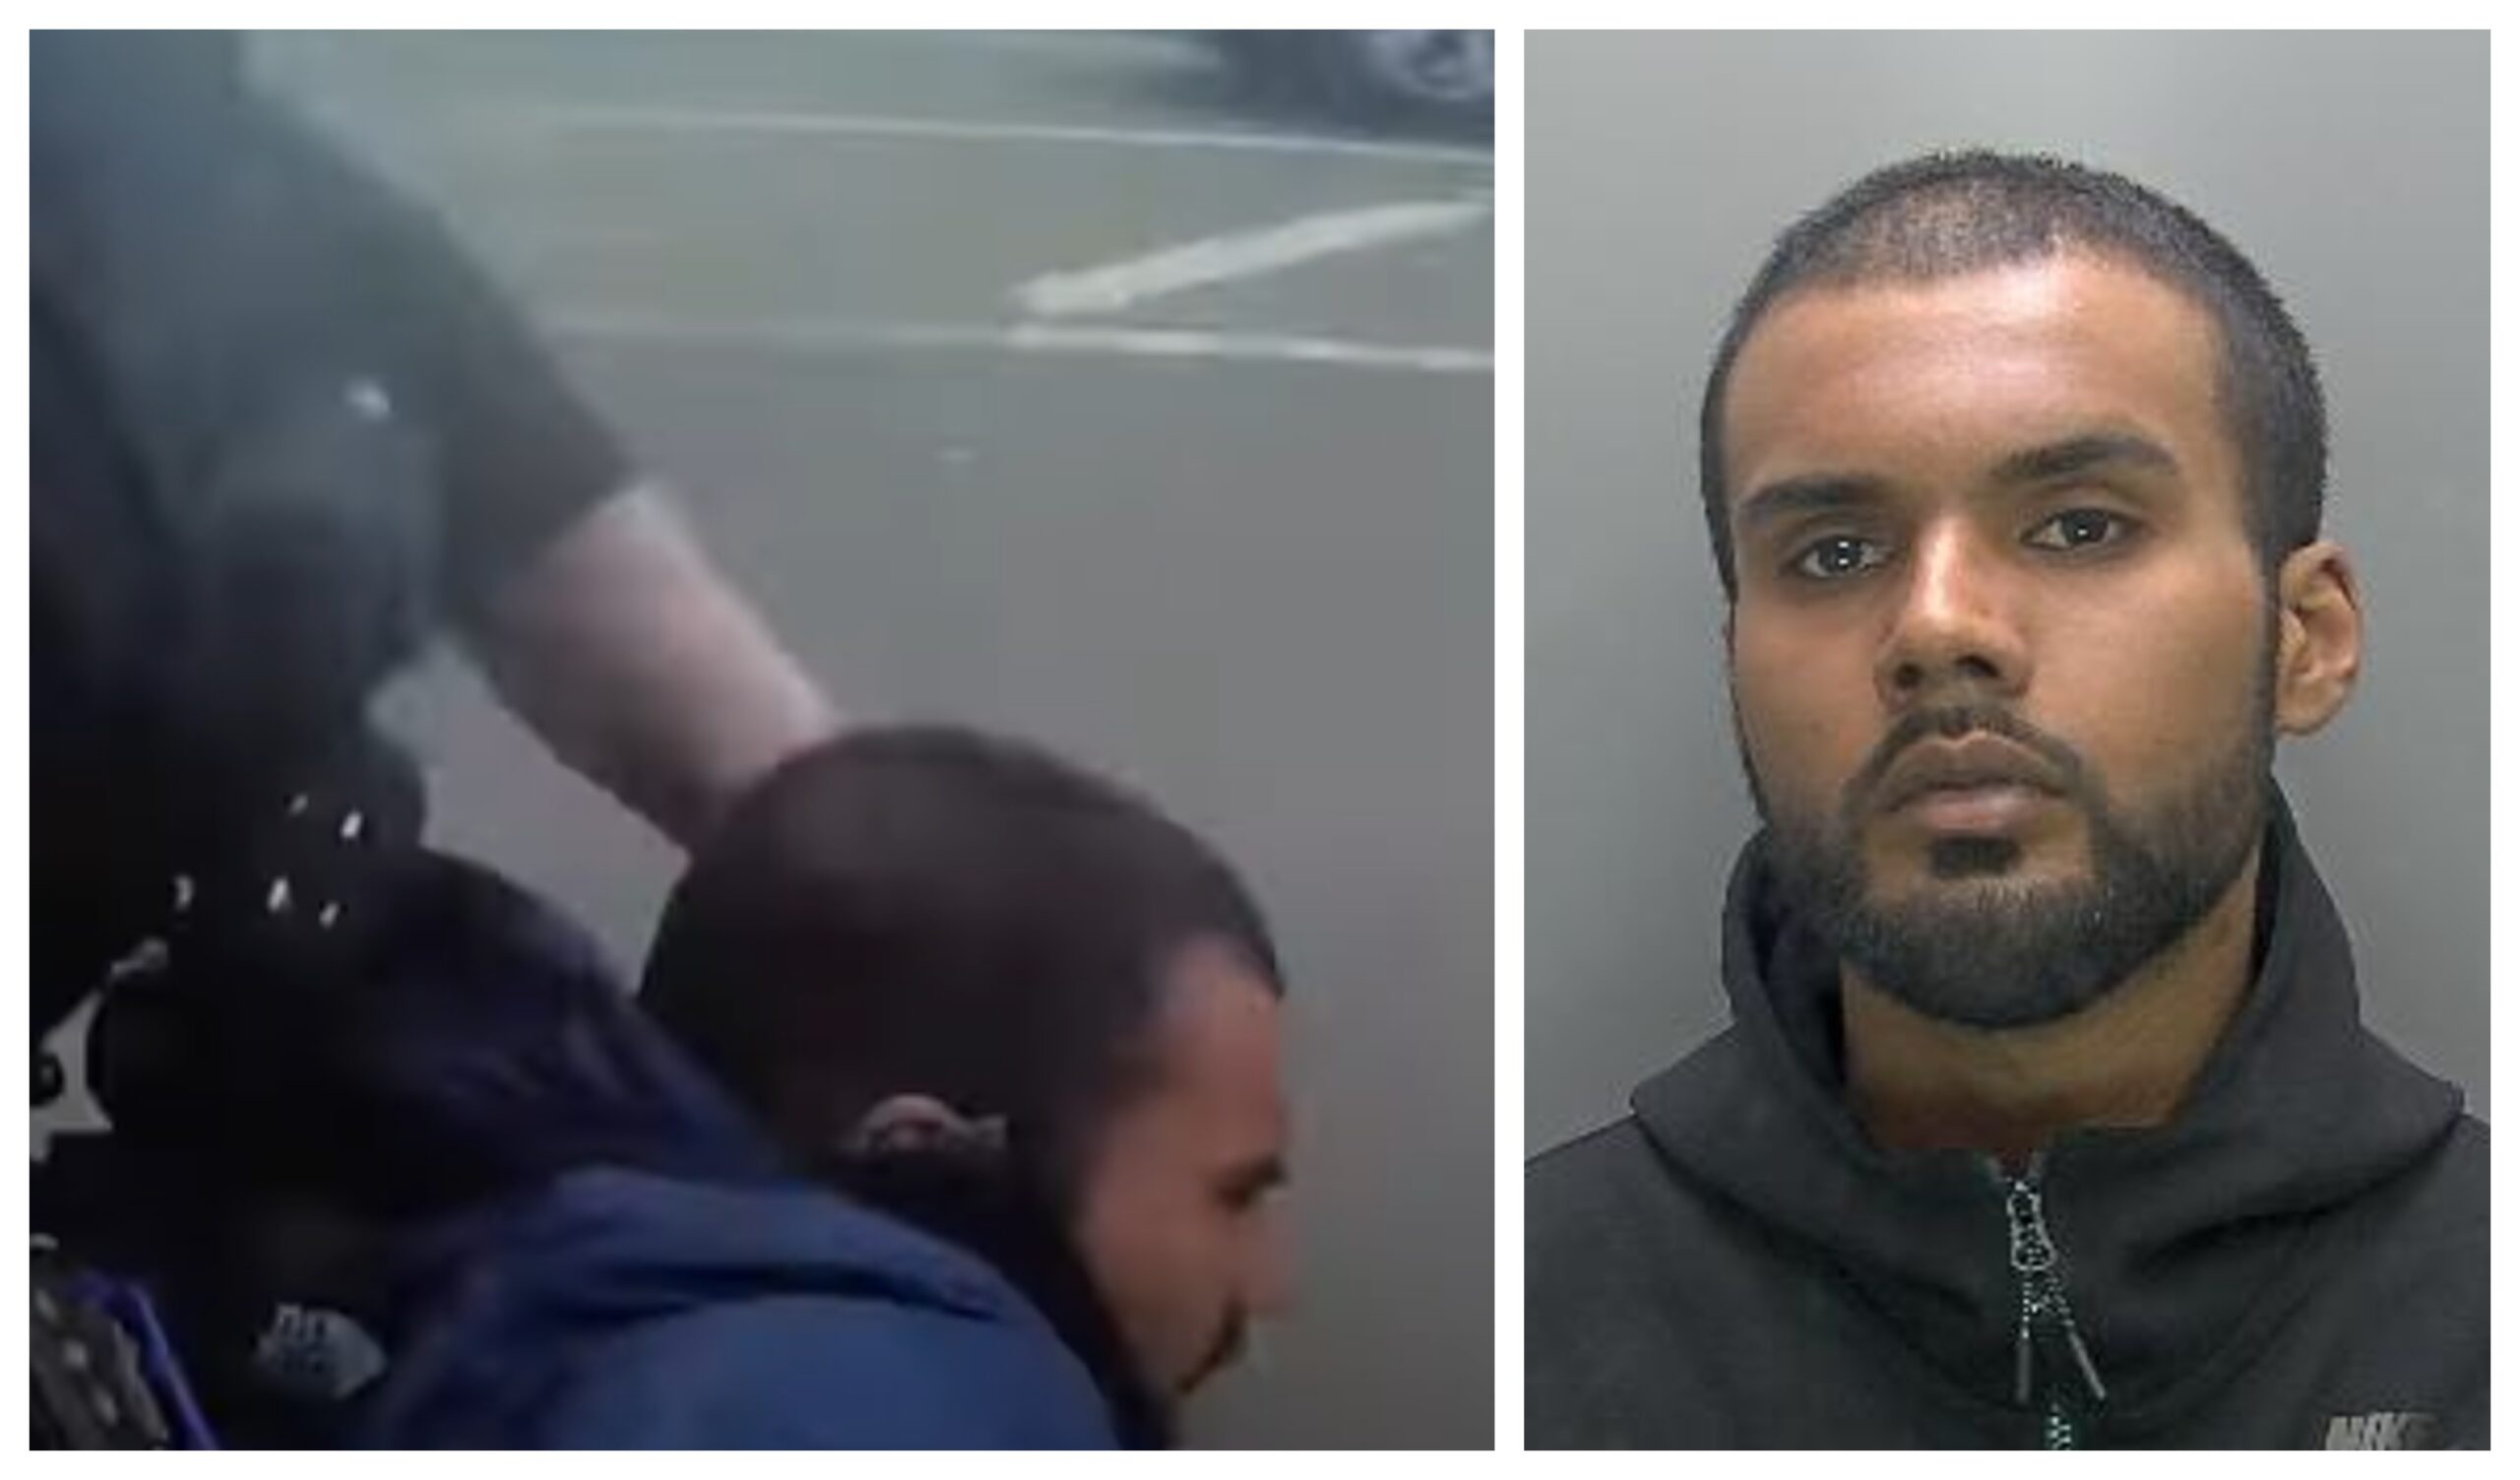 Mohammed Ali (left) after being caught by police in Cambridge and (right) custody photo